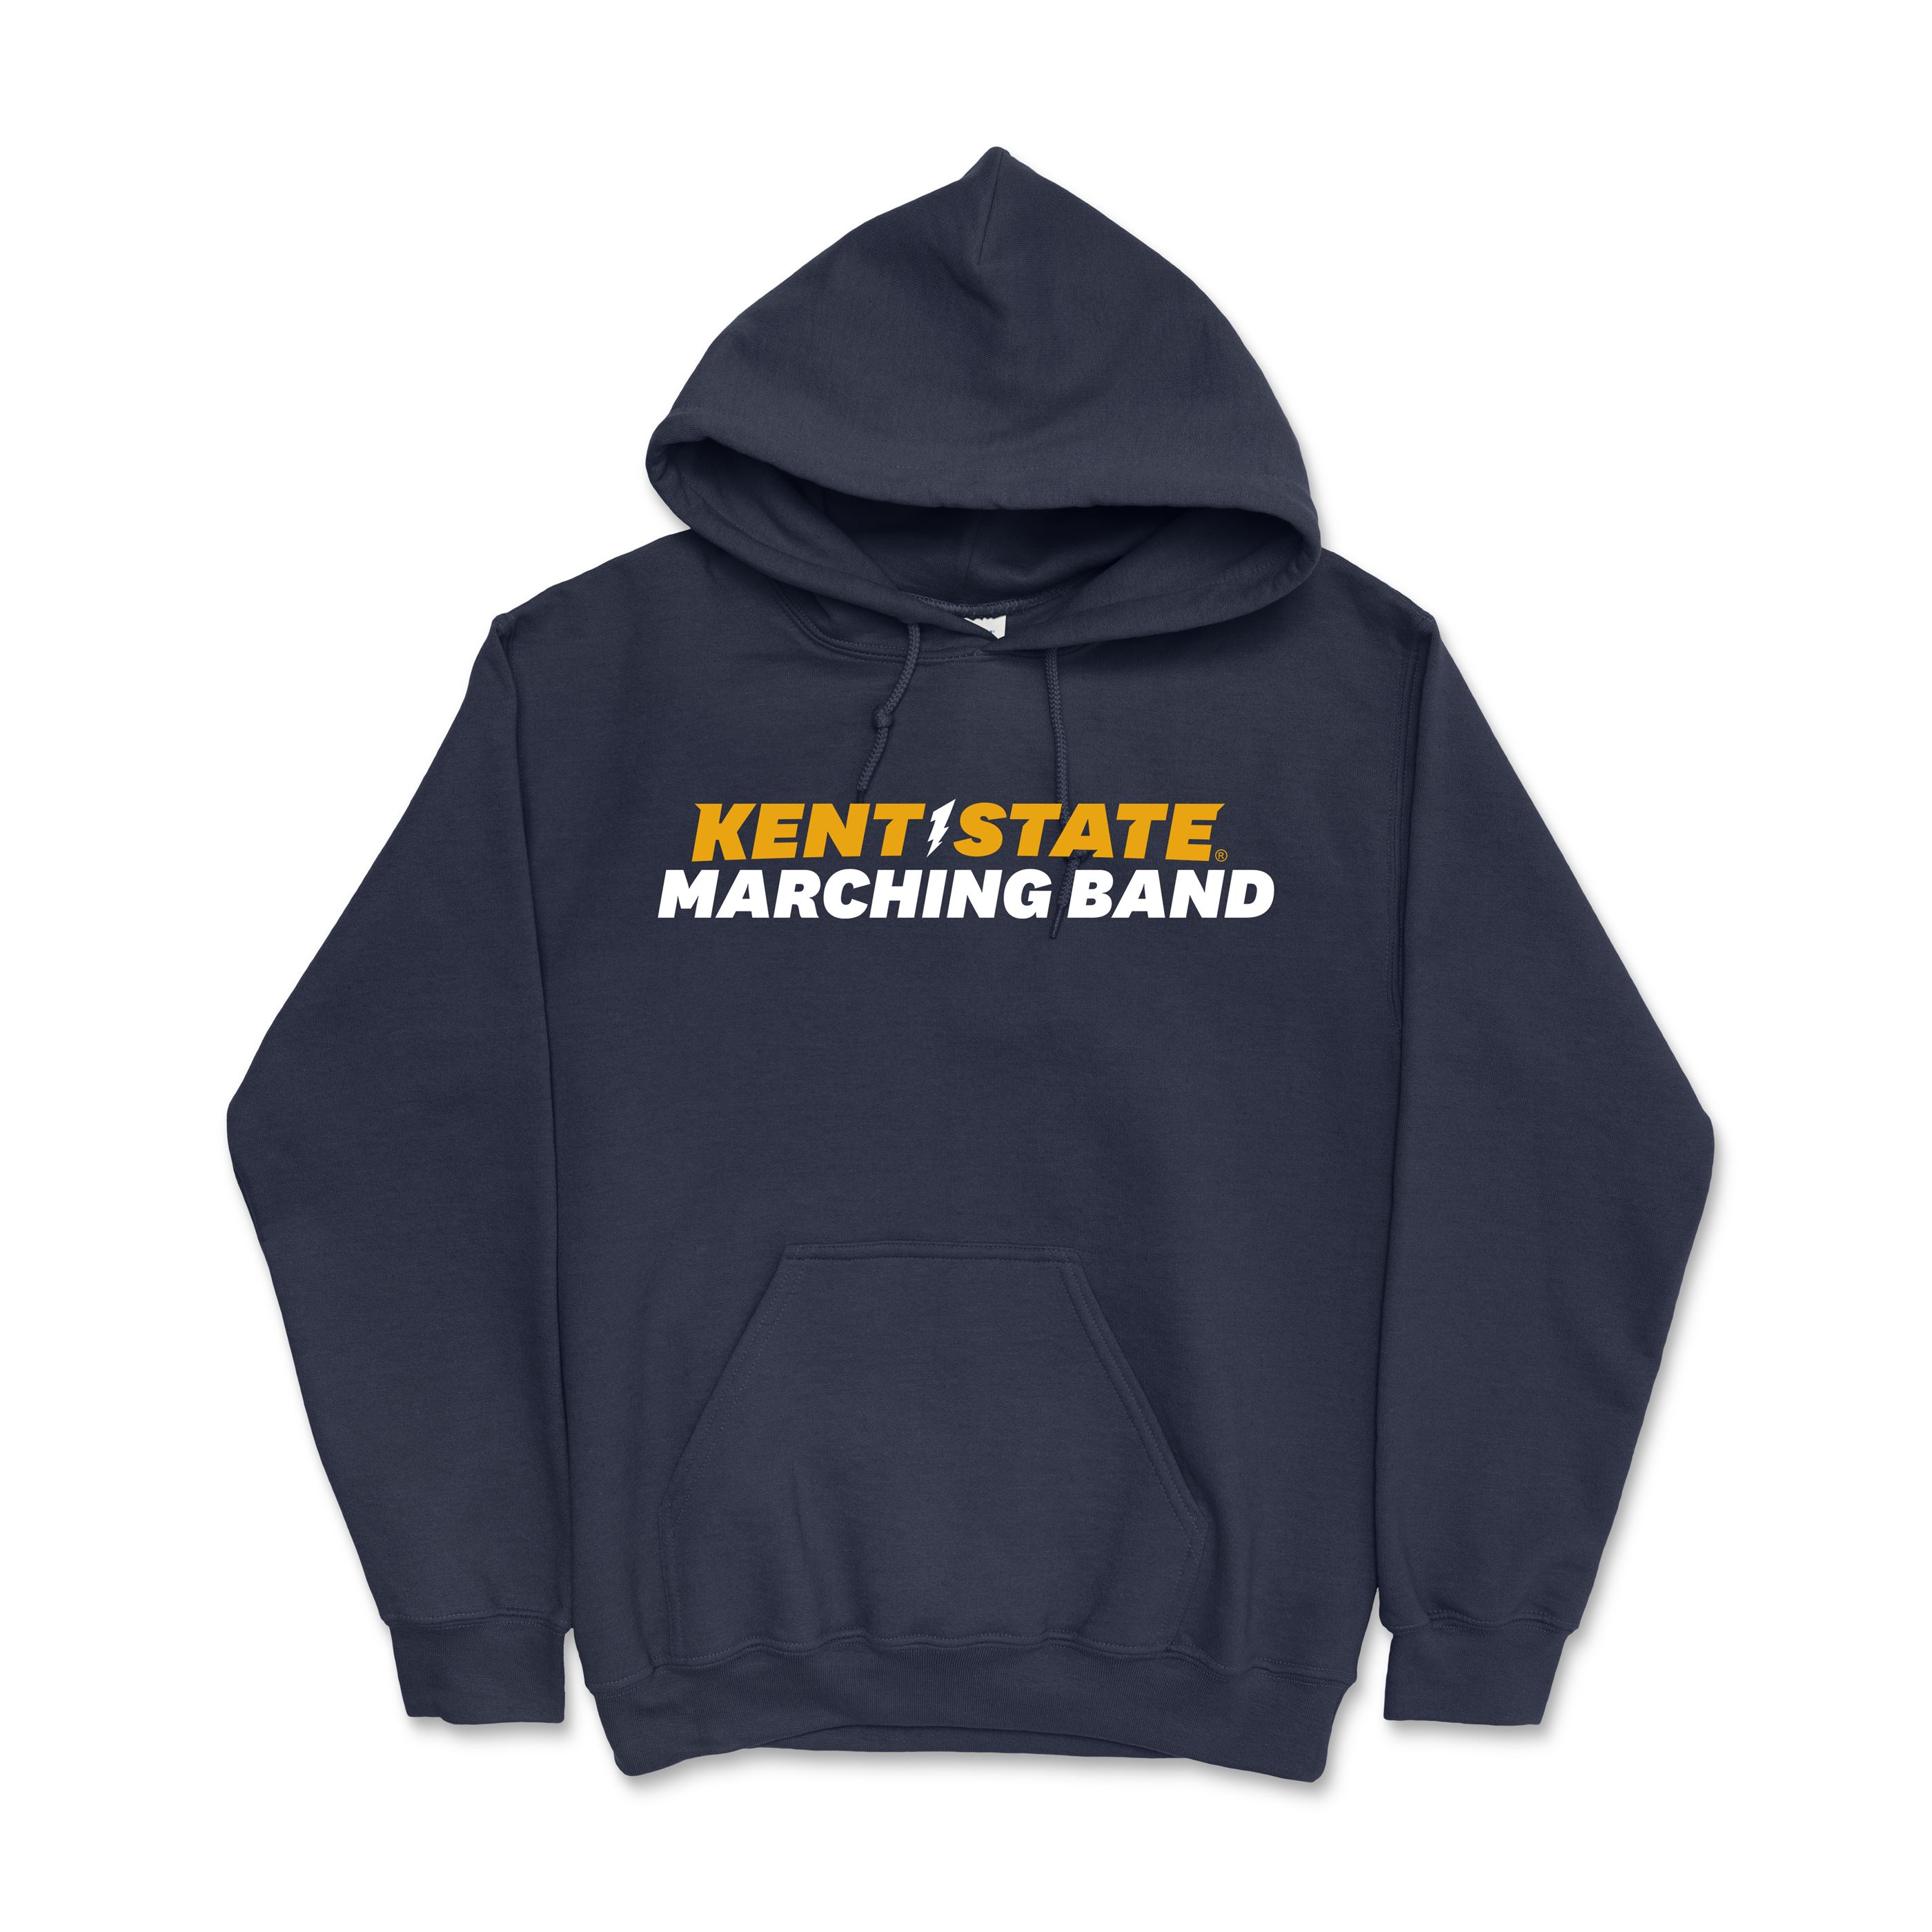 Kent State Marching Band Hoodie